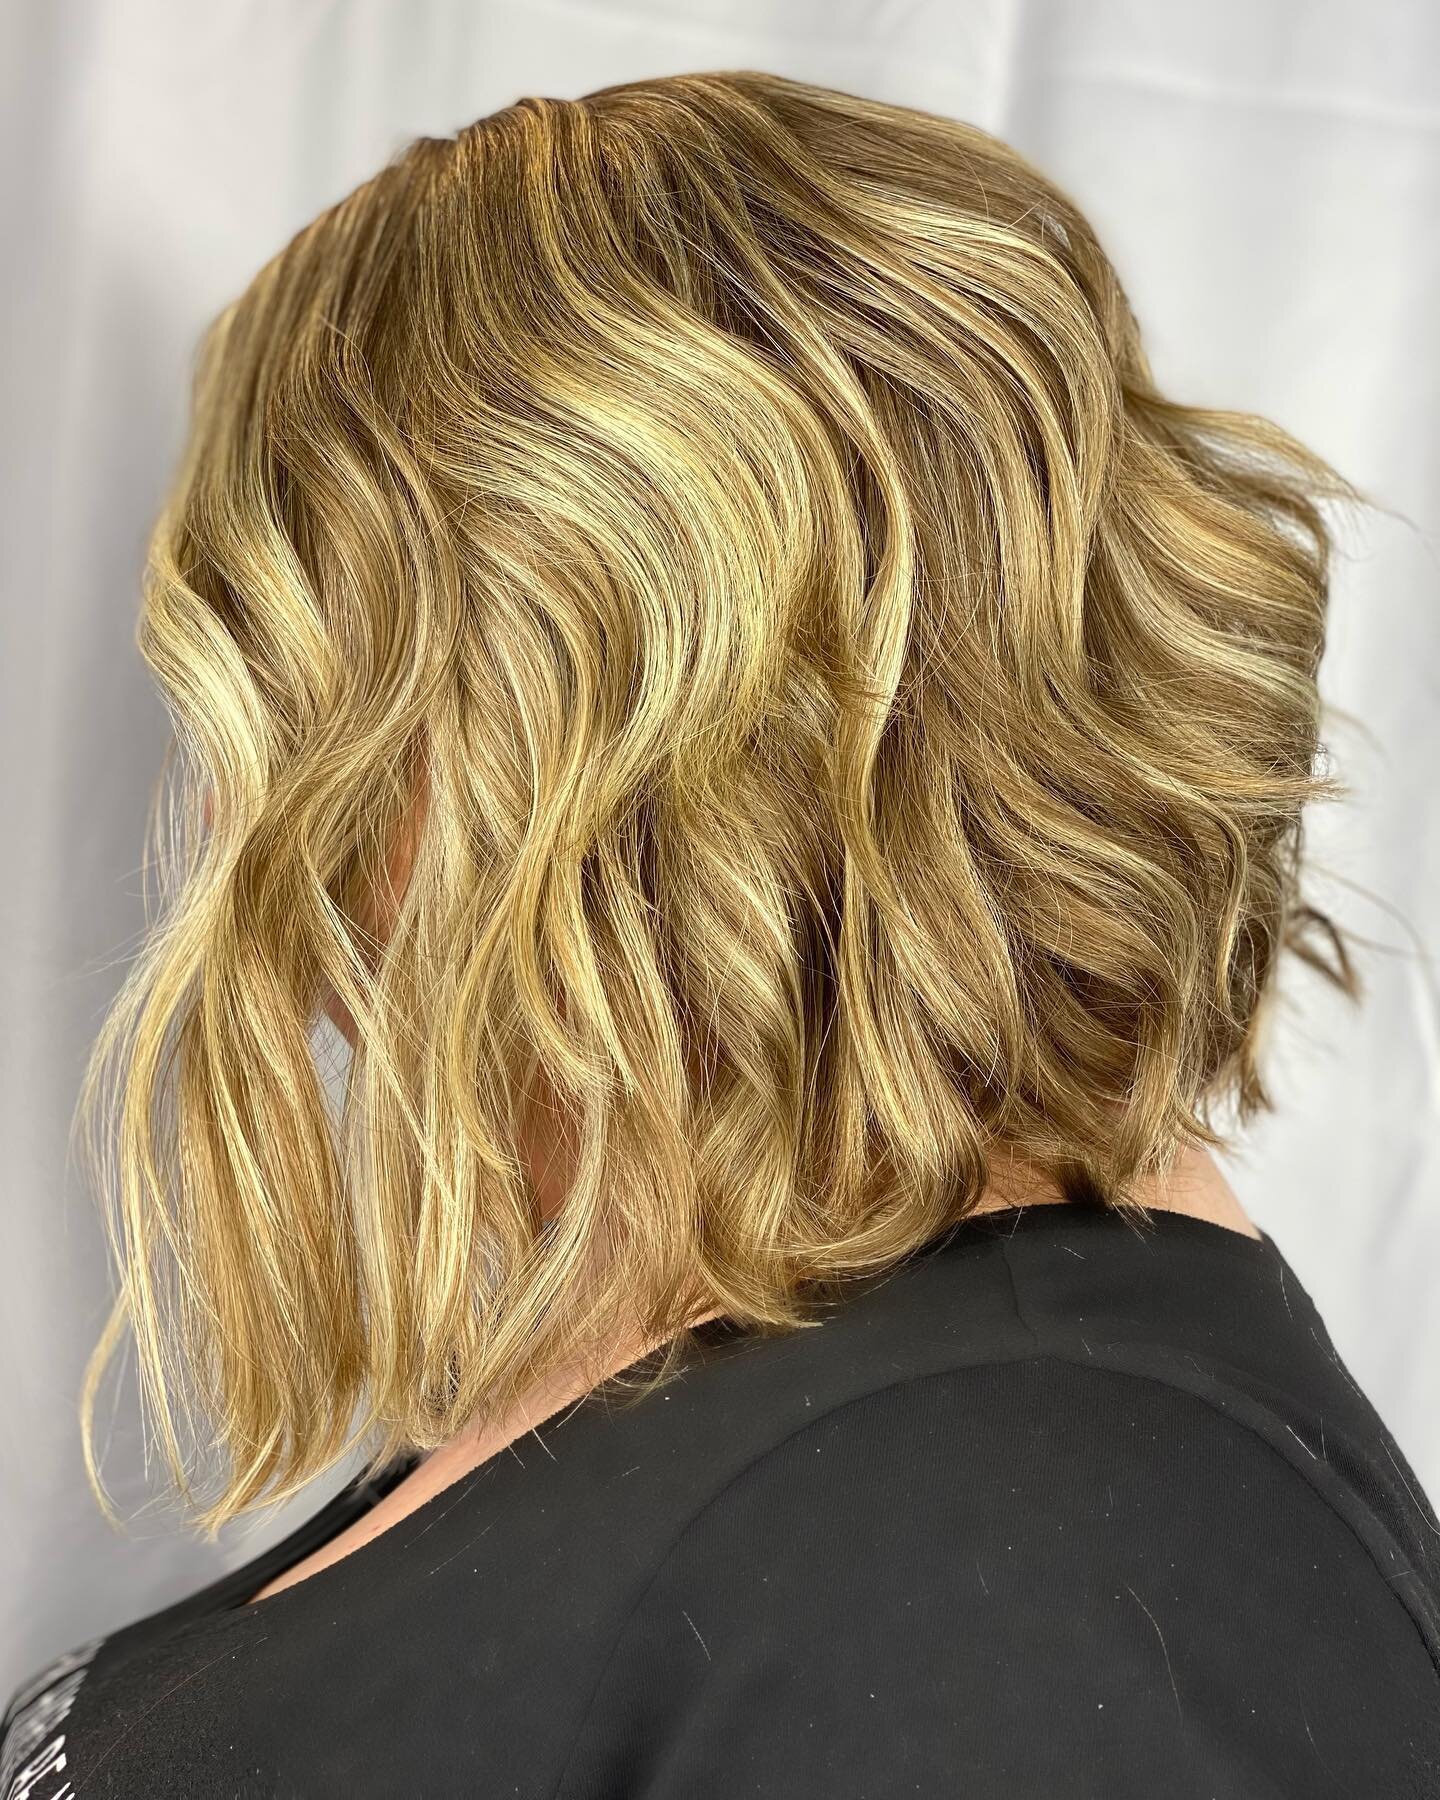 This beauty was ready for a big change. After a year long hiatus from getting her hair done, she was ready for a big haircut and brighter blonde. 
She has an absolute obscene amount of hair! We cut before the balayage, wet cut and then dry cut to deb